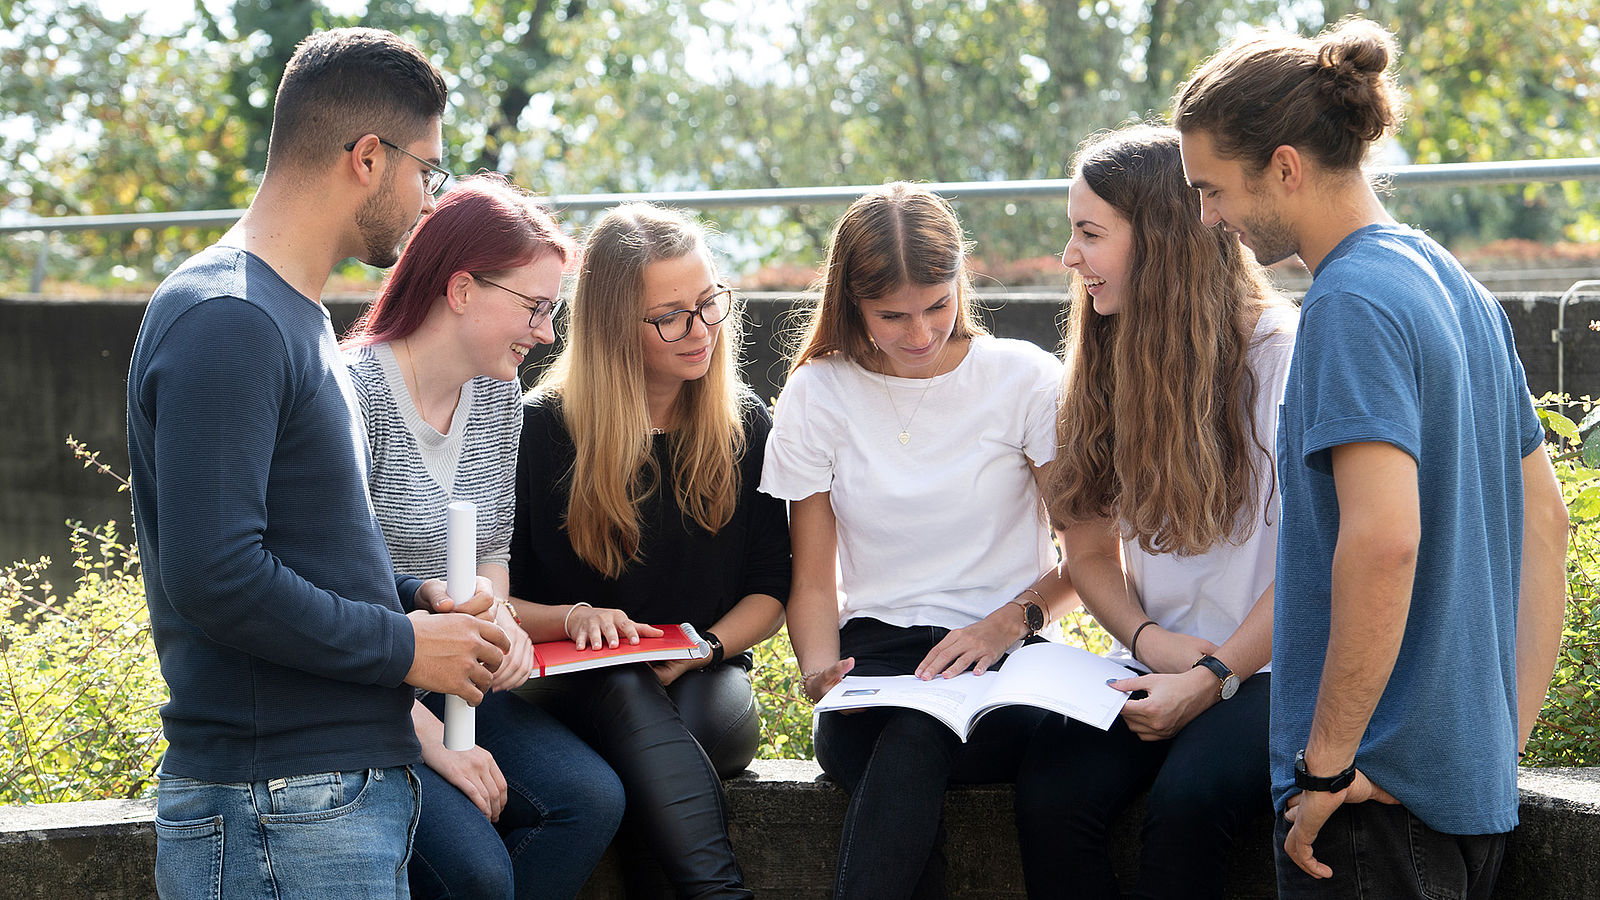 Exchange ideas with your fellow students and enjoy the campus of Esslingen University of Applied Sciences.